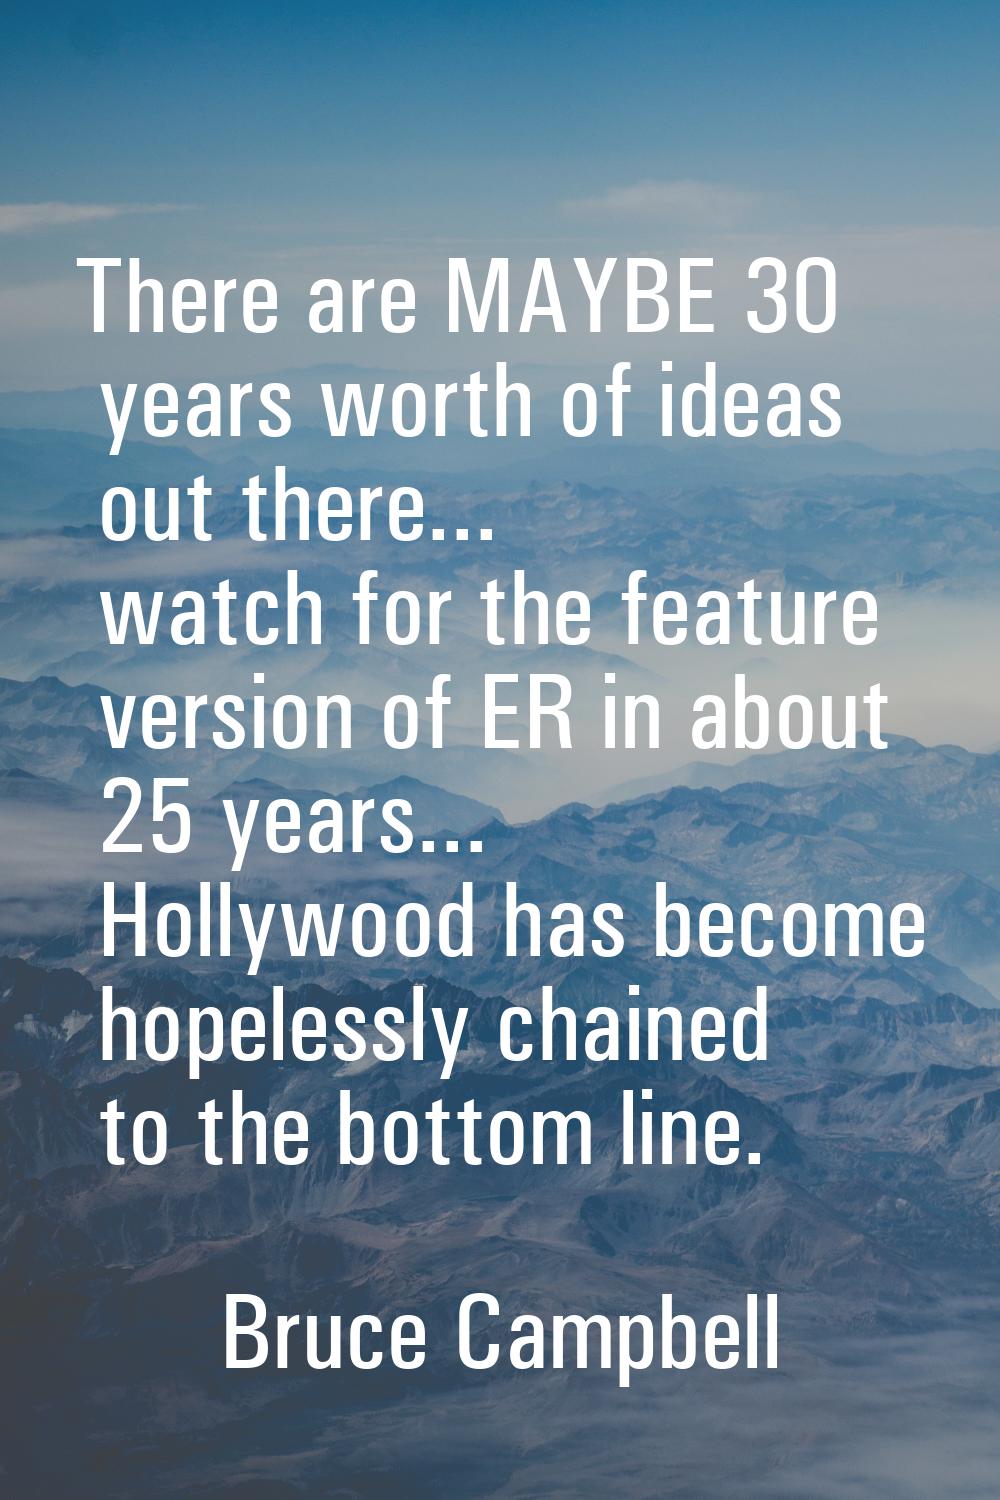 There are MAYBE 30 years worth of ideas out there... watch for the feature version of ER in about 2